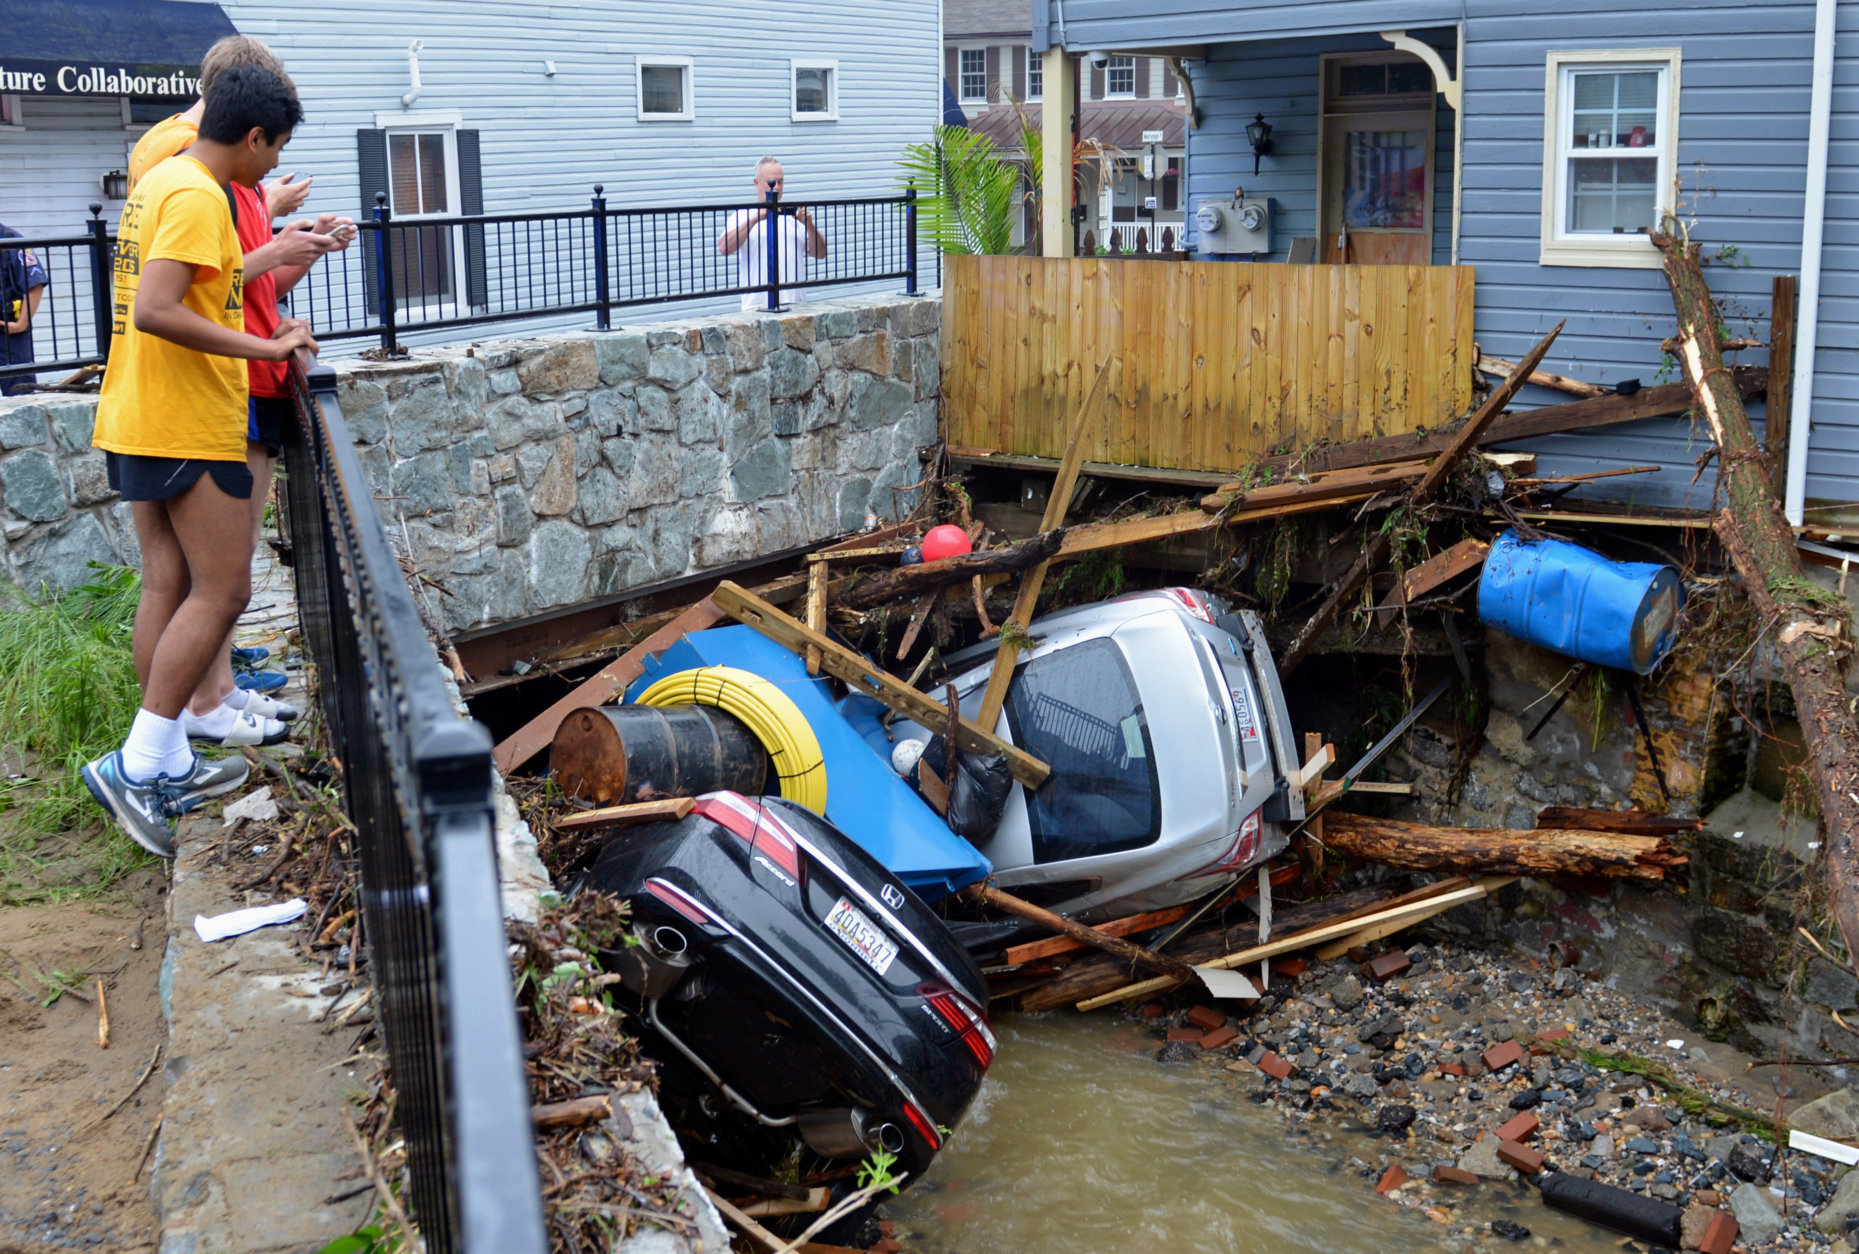 Residents gather by a bridge to look at cars left crumpled in one of the tributaries of the Patapsco River that burst its banks as it channeled through historic Main Street in Ellicott City, Md., on May 28, 2018.  (AP Photo/David McFadden. file)